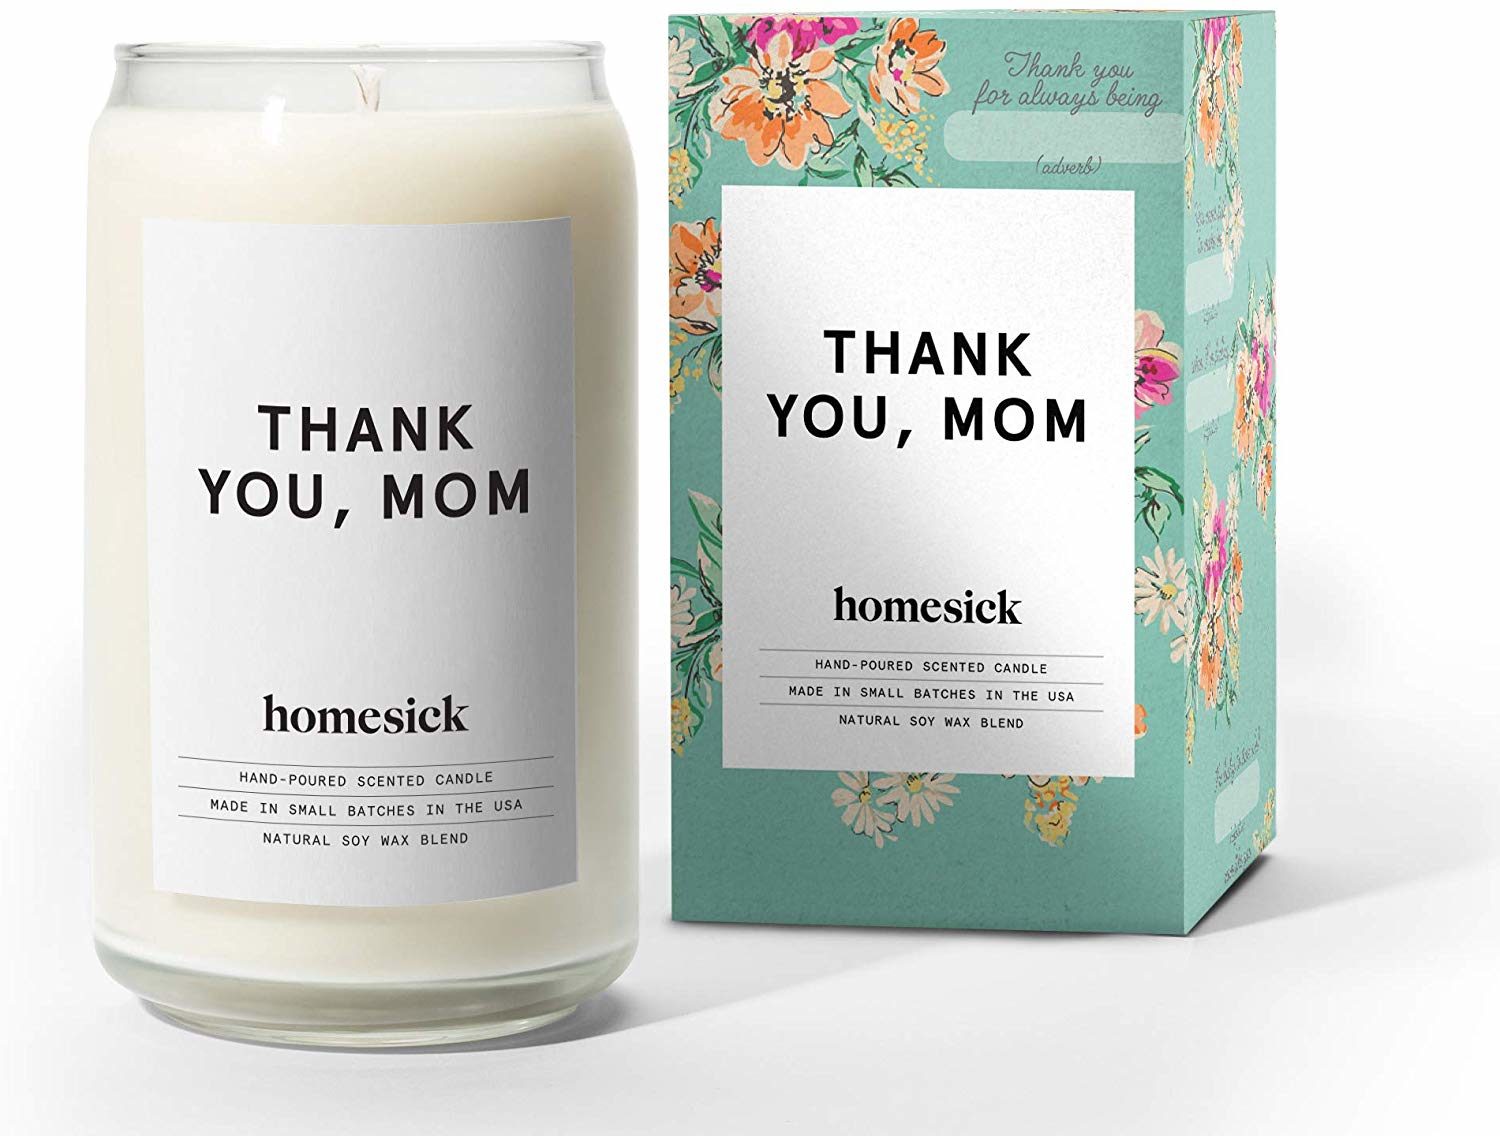 Thank You Gift Ideas 2022: Thank You Mom Candle by Homesick 2022